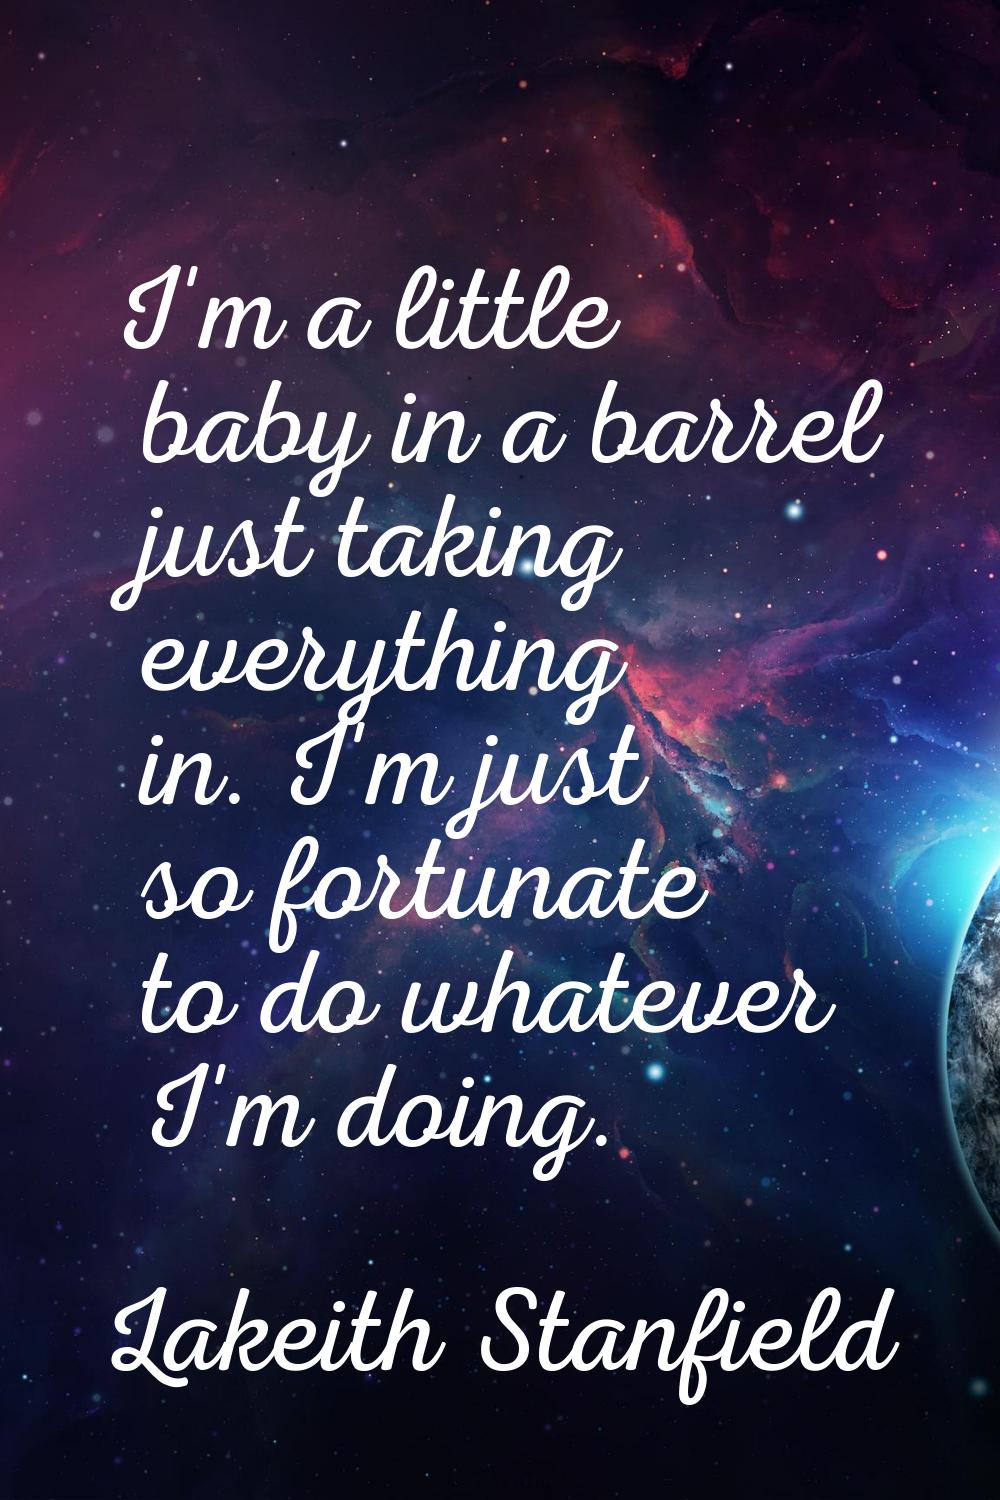 I'm a little baby in a barrel just taking everything in. I'm just so fortunate to do whatever I'm d